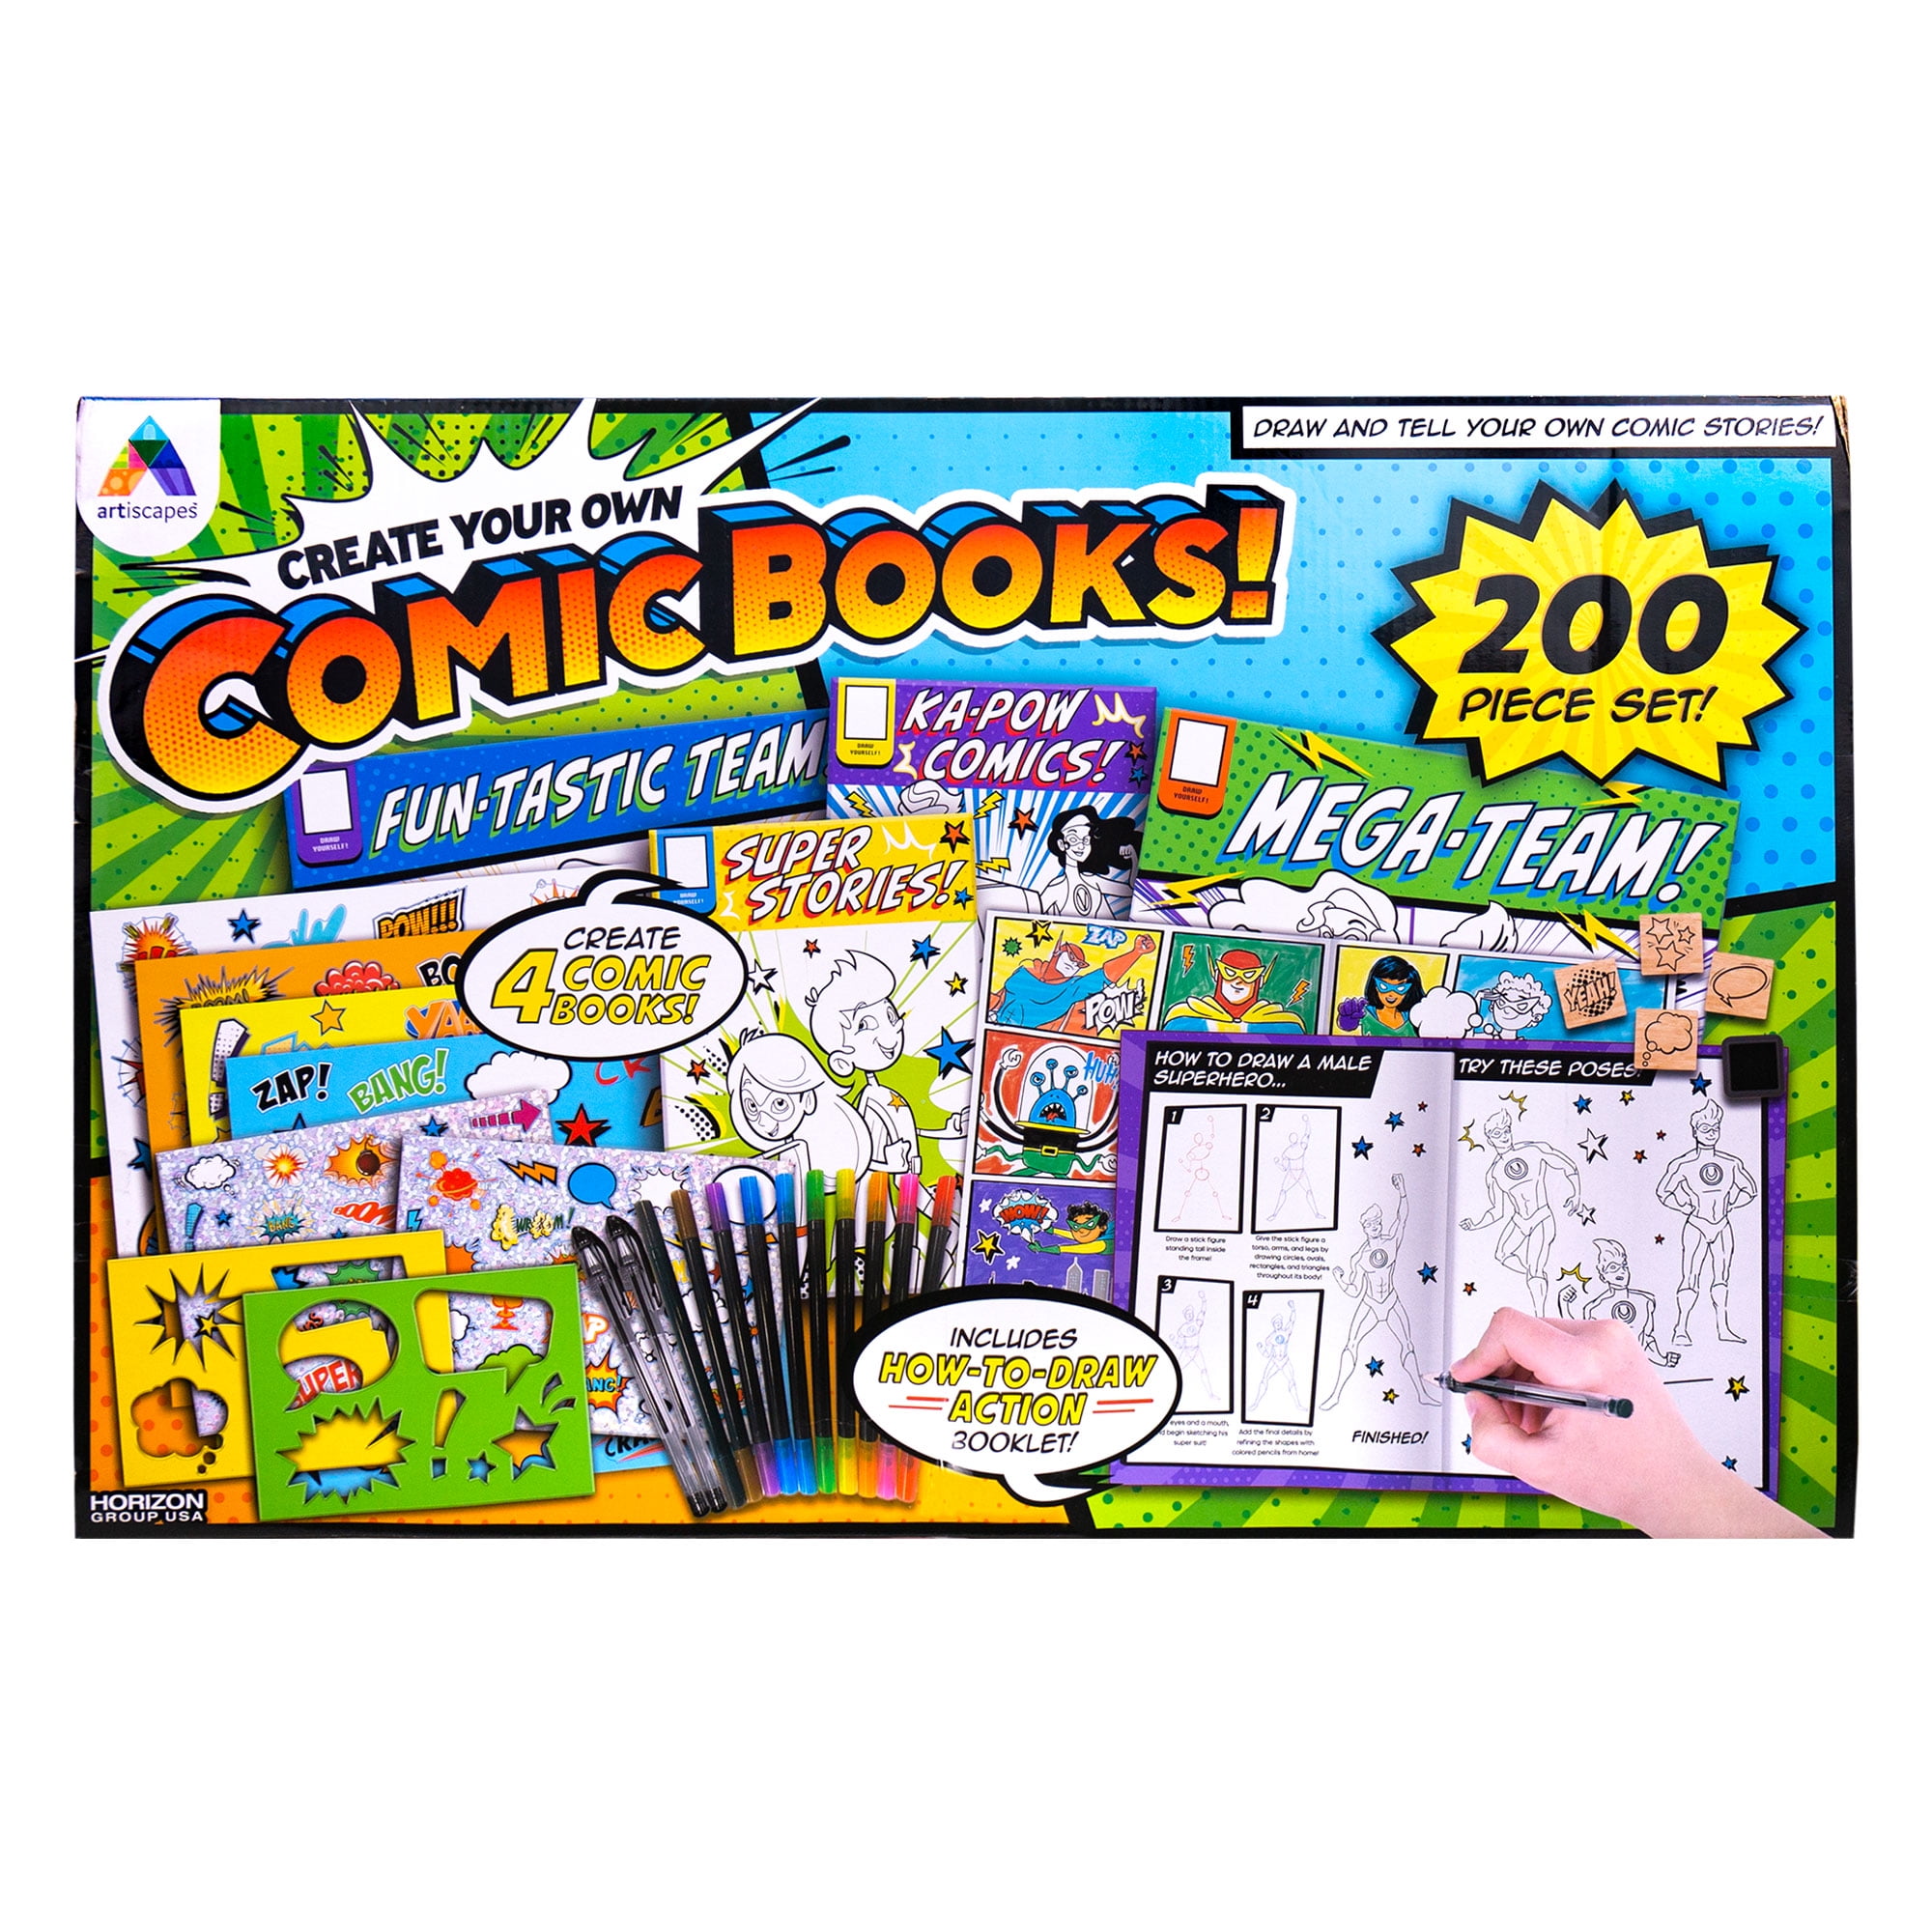 Art for Kids Ser.: Comic Strips : Create Your Own Comic Strips from Start  to Finish by Art Roche (2007, Hardcover) for sale online